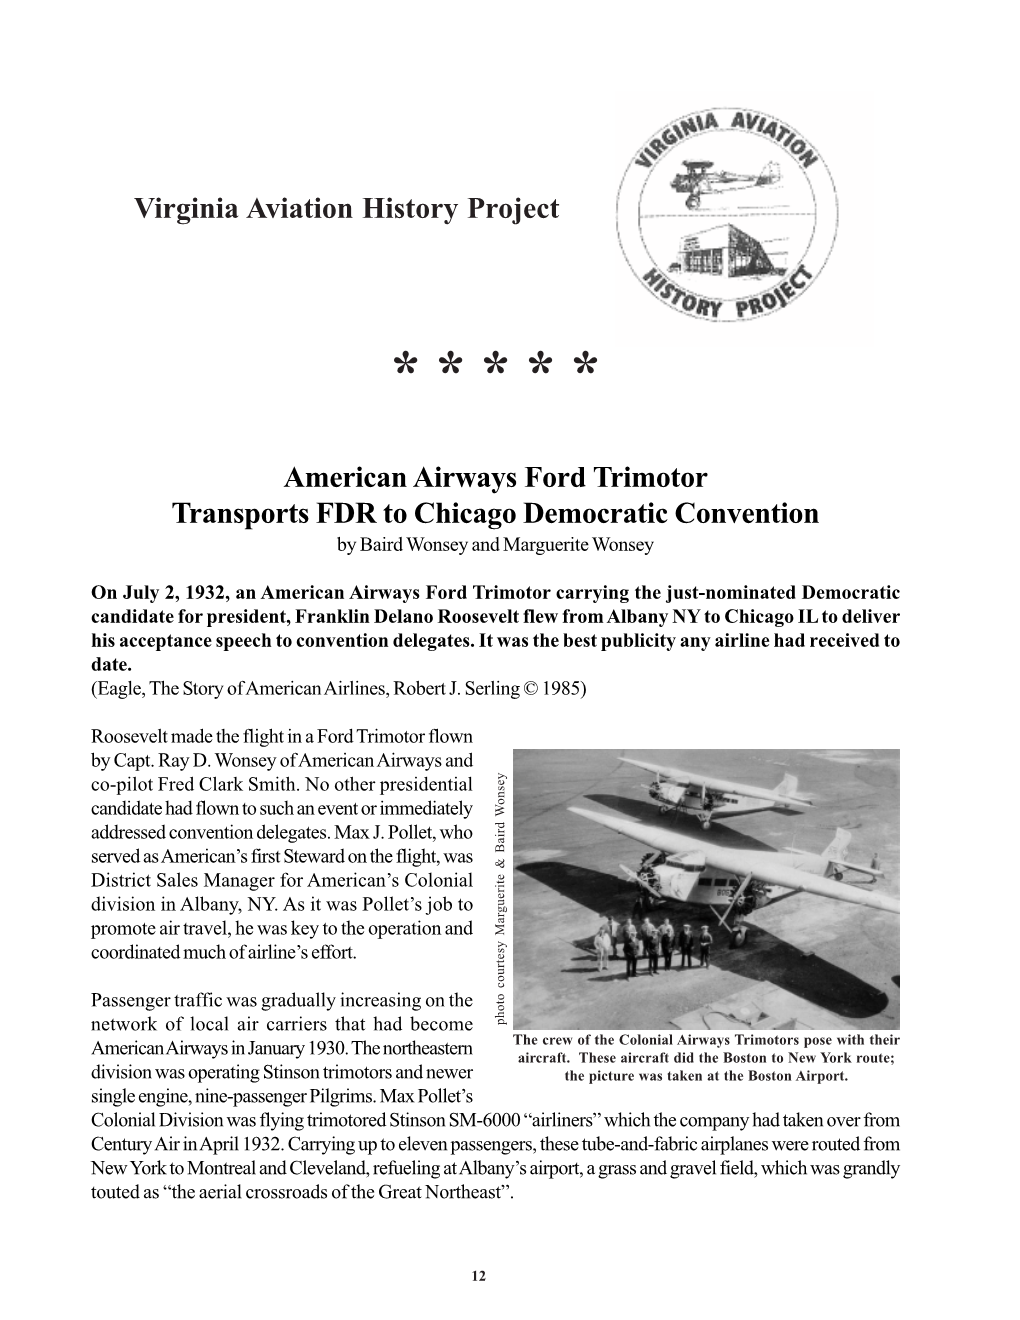 American Airways Ford Trimotor Transports FDR to Chicago Democratic Convention by Baird Wonsey and Marguerite Wonsey